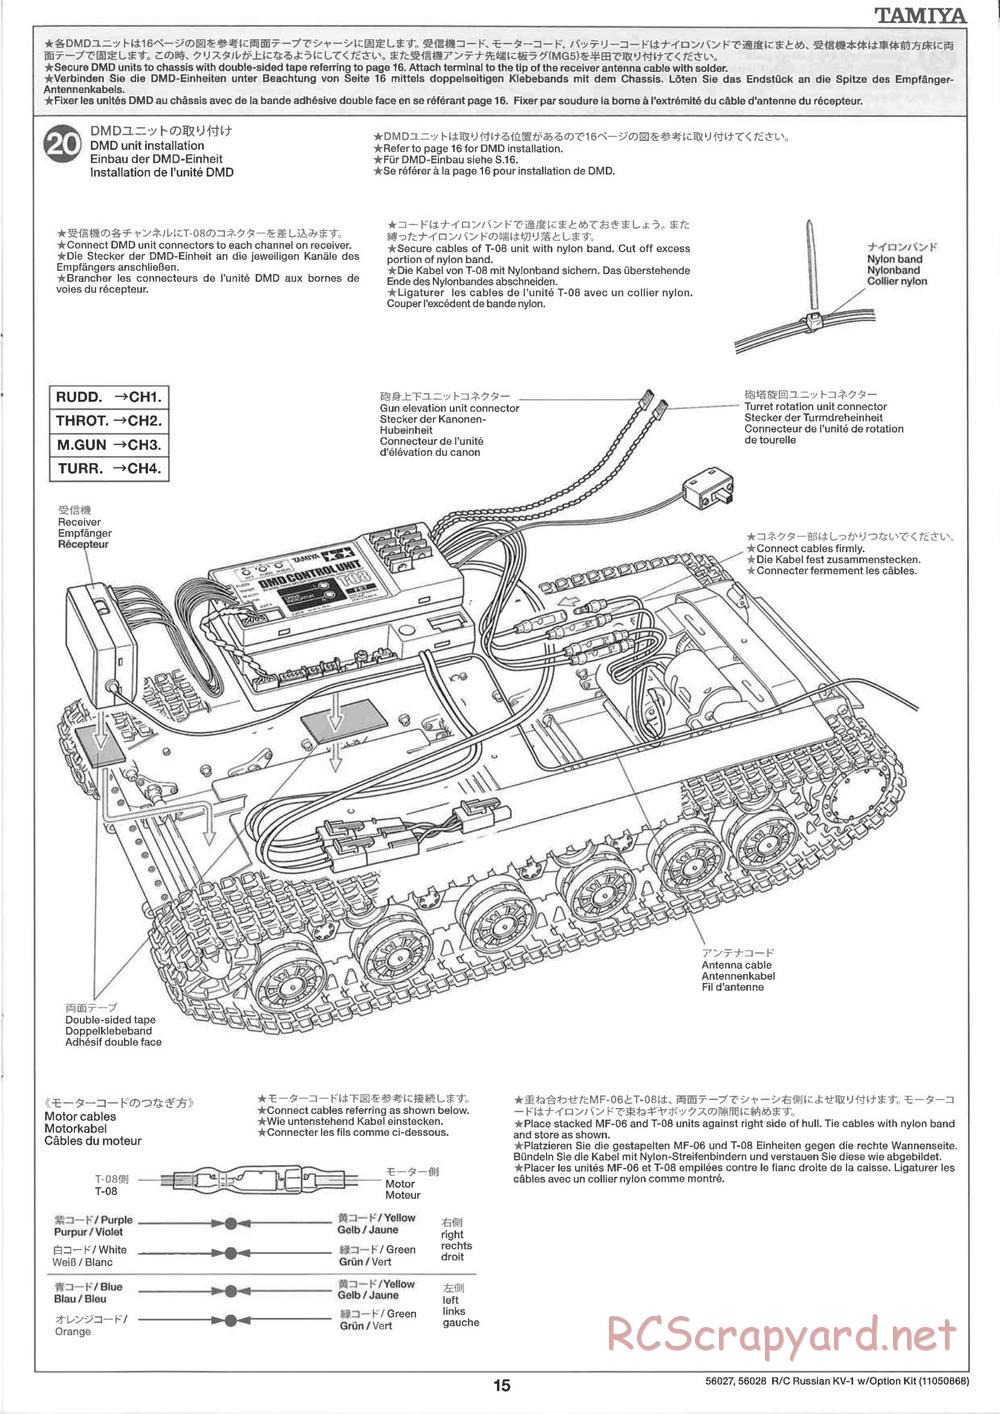 Tamiya - Russian Heavy Tank KV-1 - 1/16 Scale Chassis - Manual - Page 15